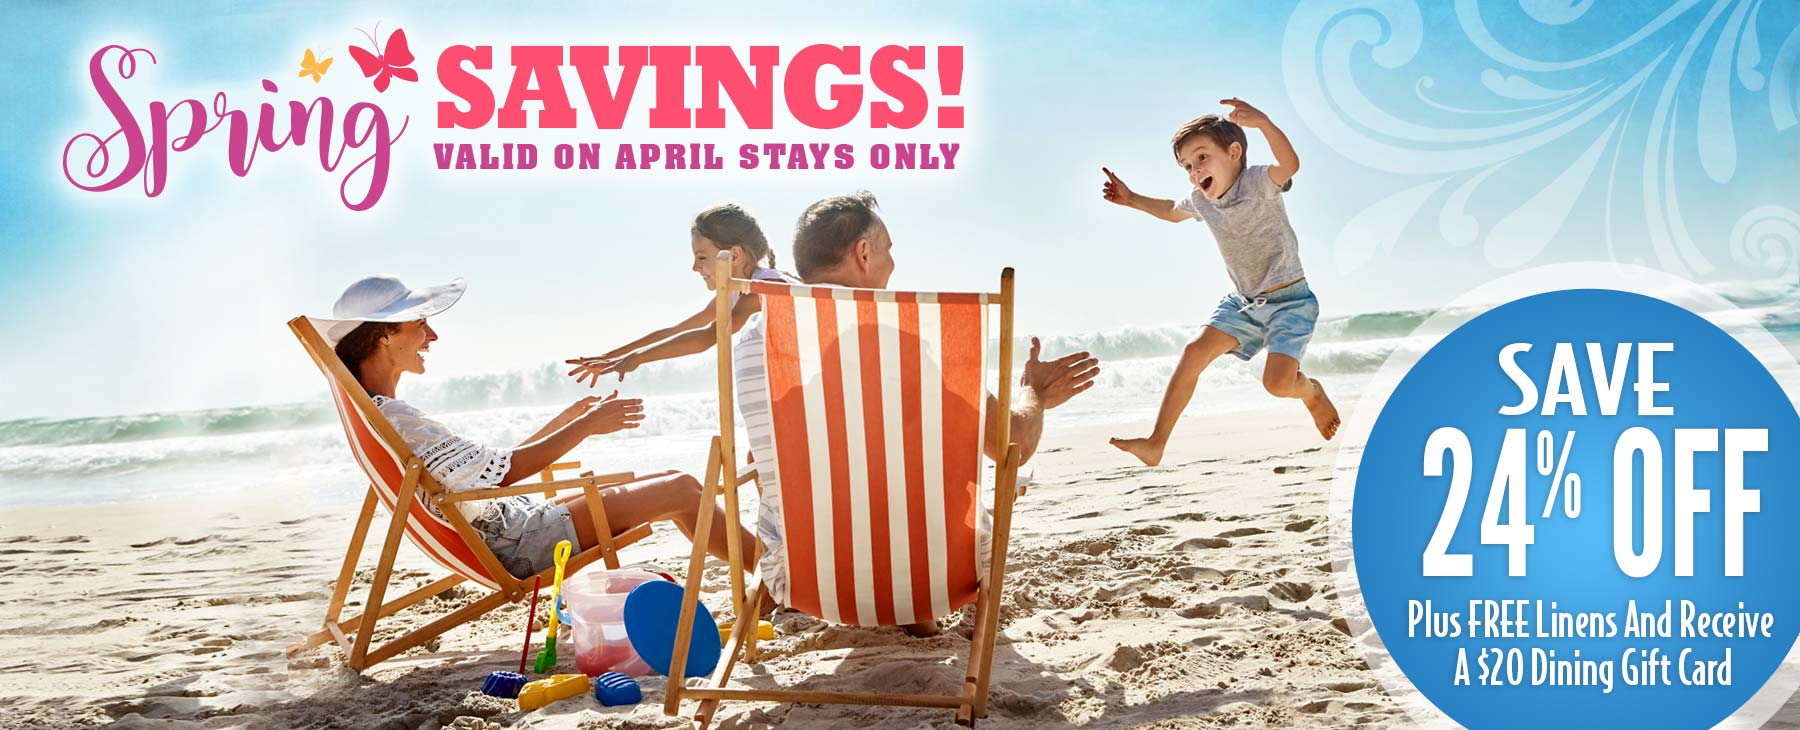 Spring Savings for the Month of April - Save 24% Off!